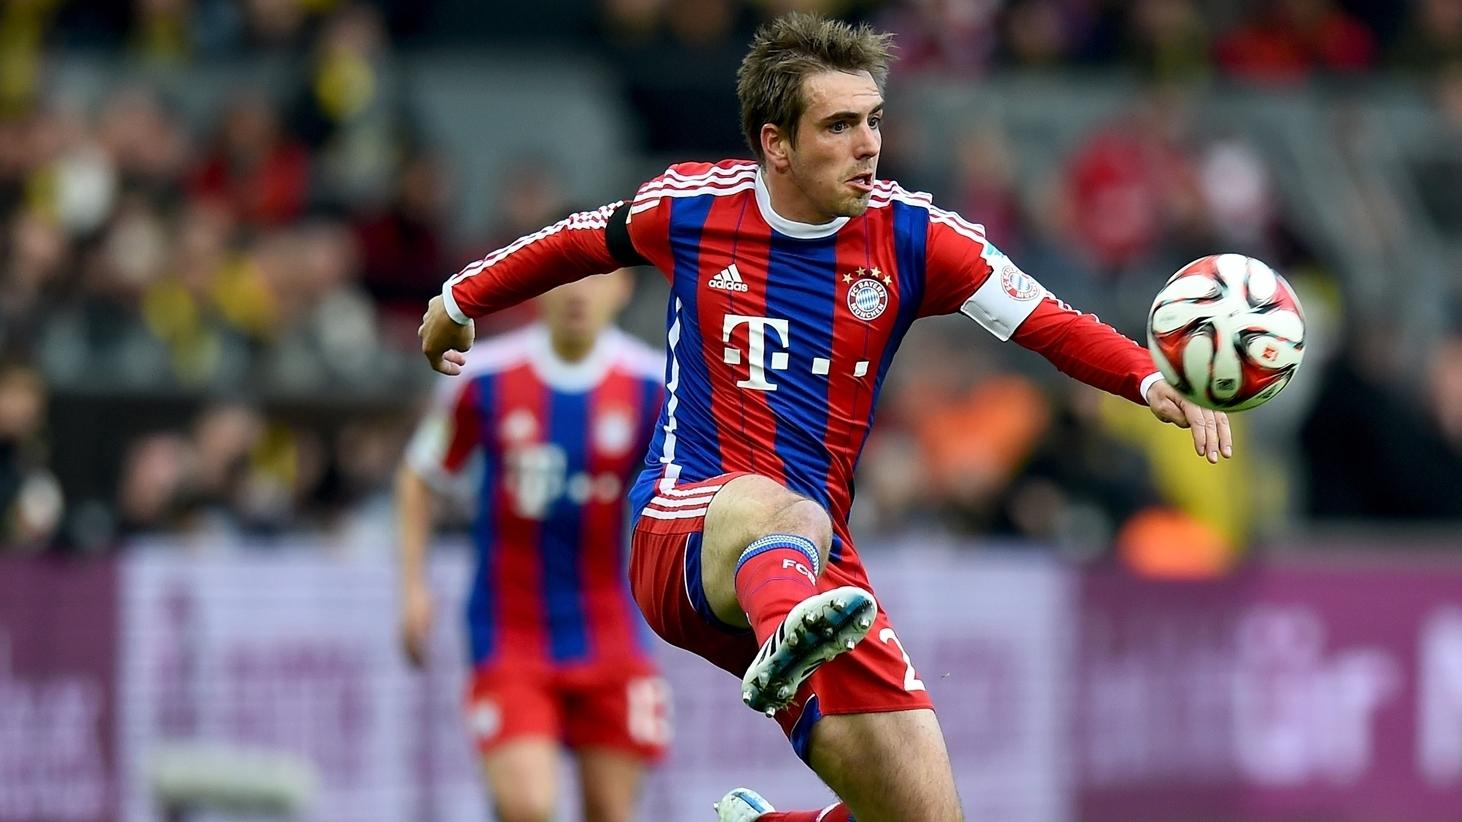 Bayern's Lahm glad to be back for business end | UEFA Champions League |  UEFA.com